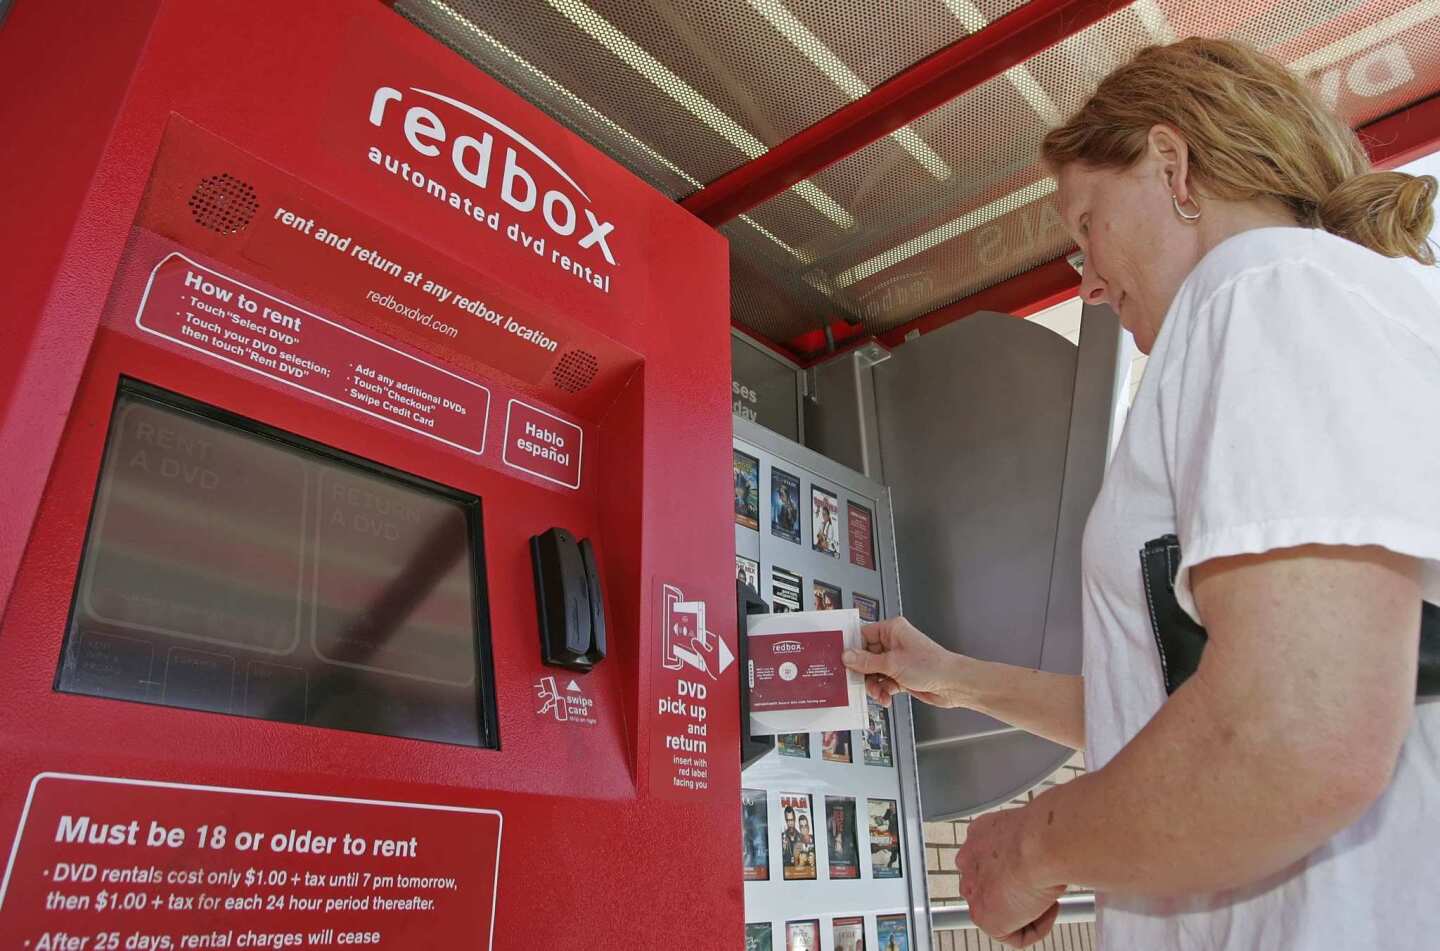 OVERRATED: The Redbox redirect